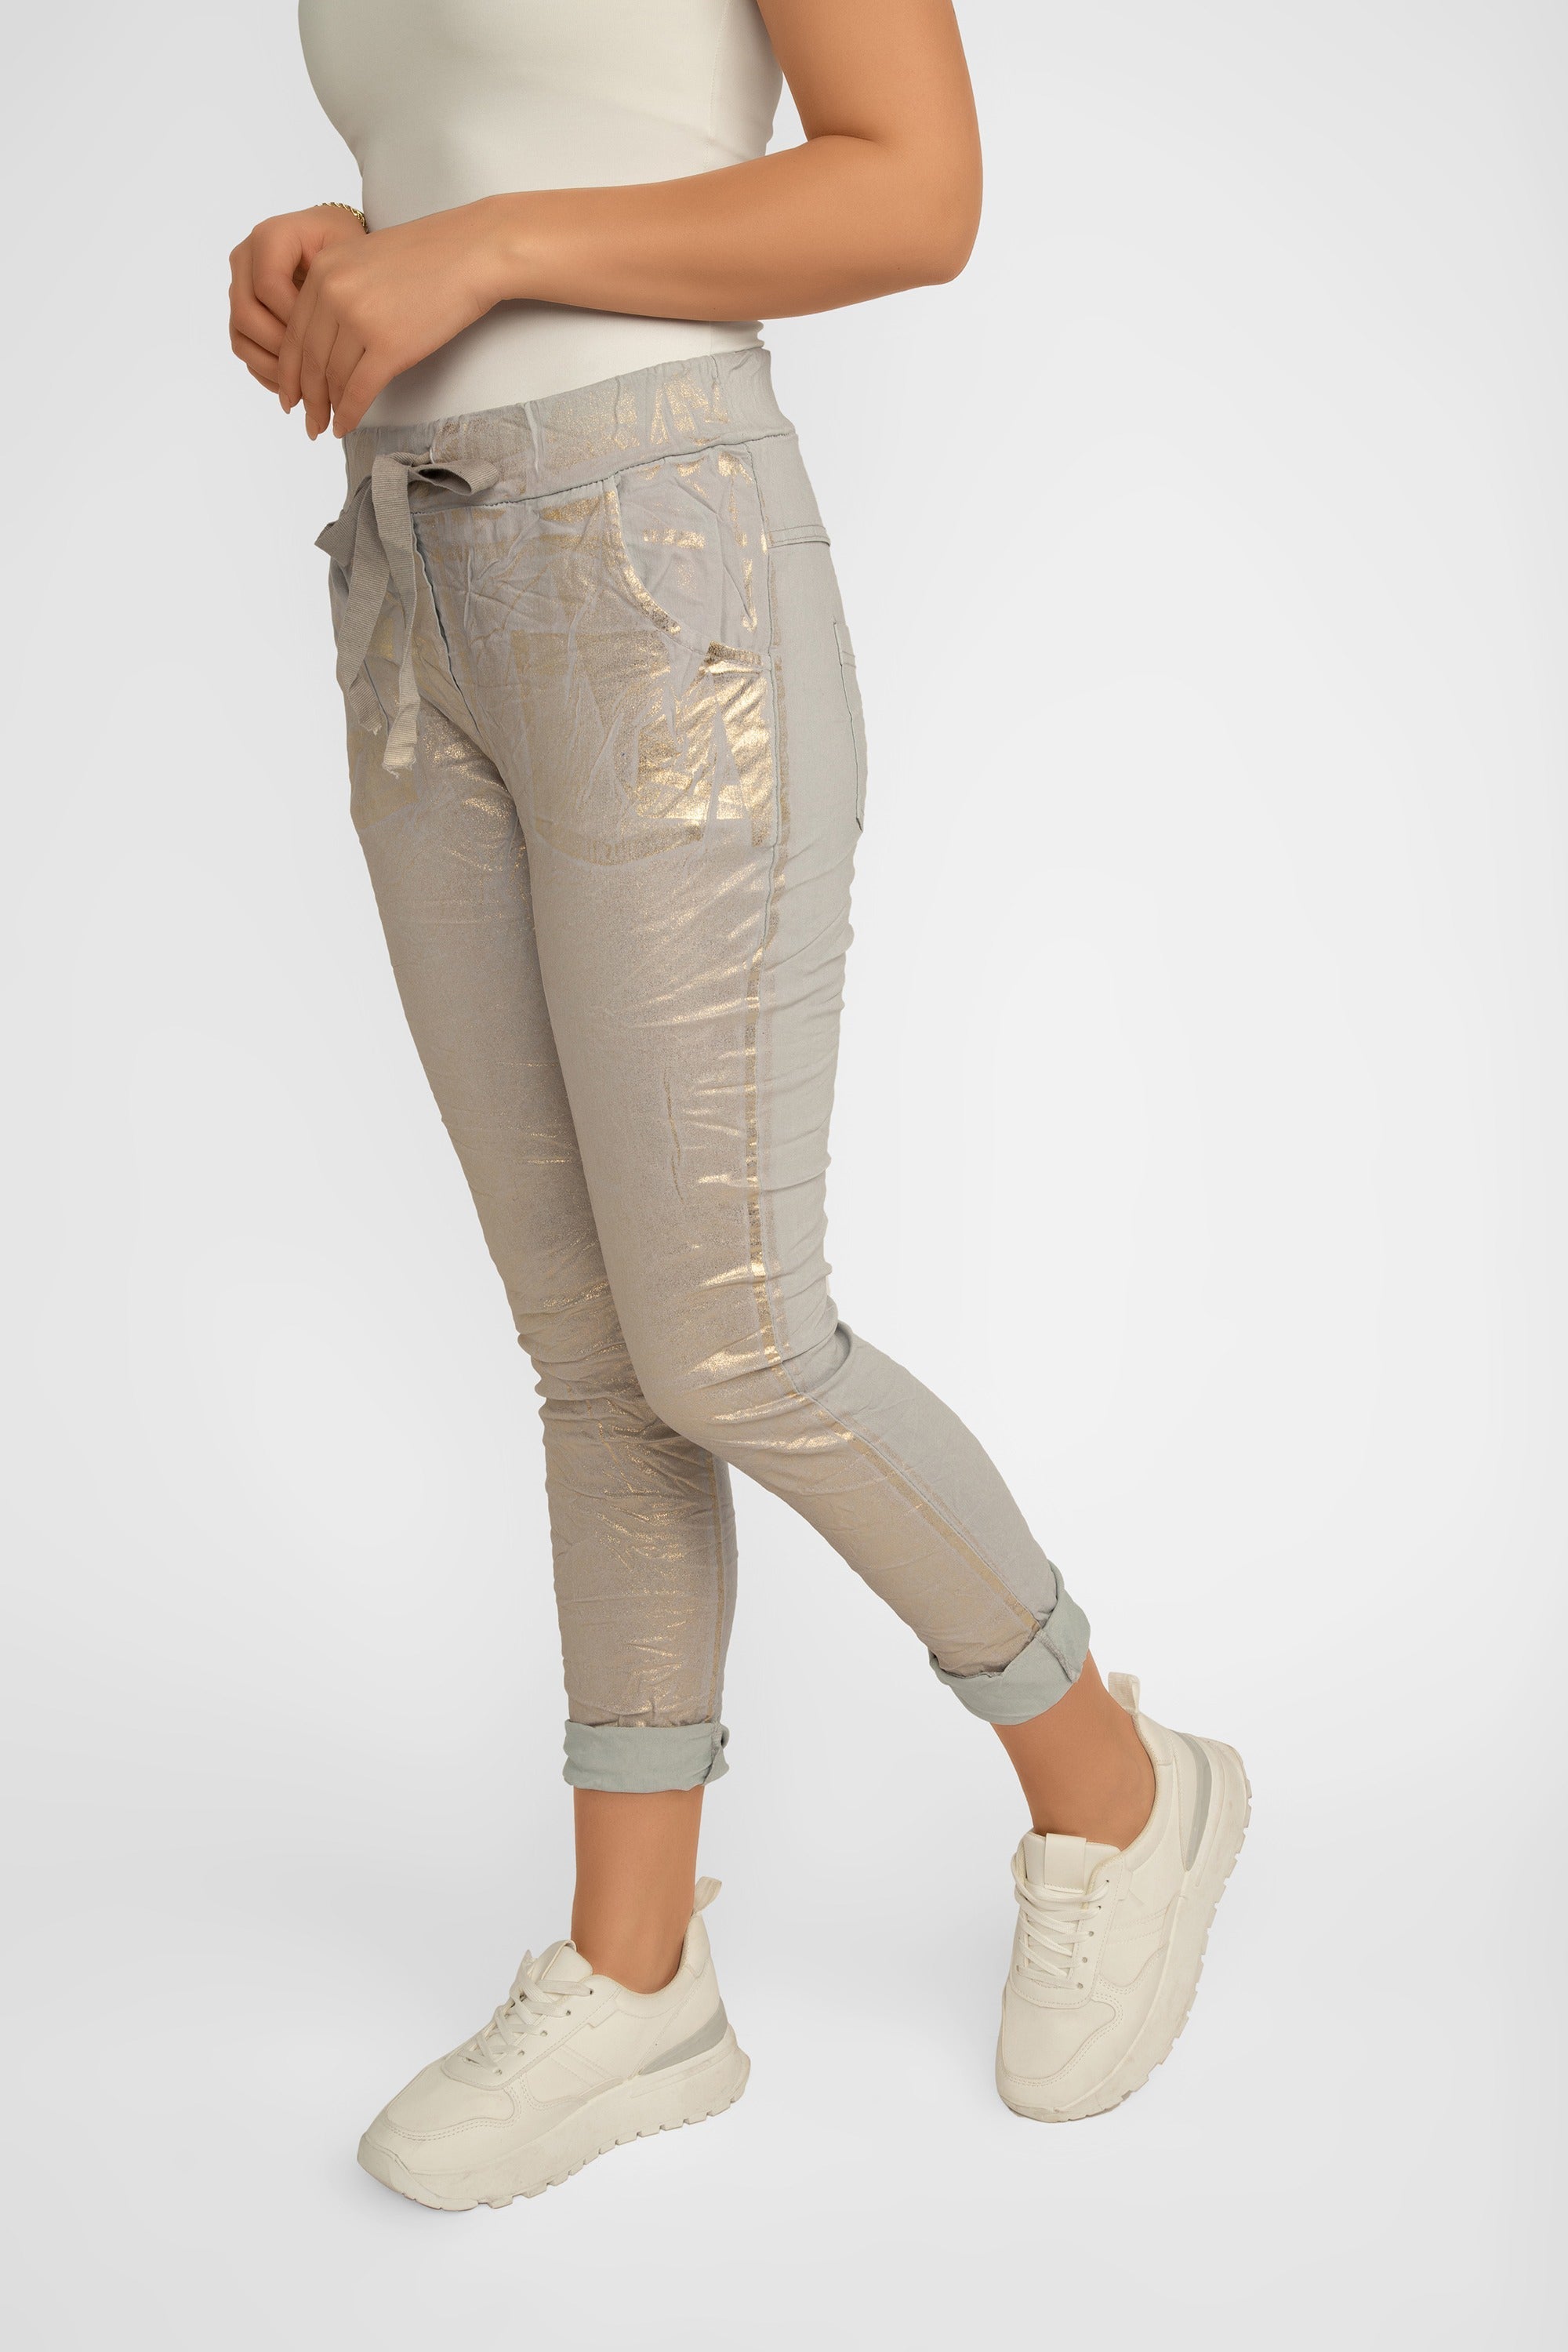 Side view of Bell Amore (21258) Women's Cropped Slim Fit, Metallic Coated Pull On Pants with Pockets in Light Grey with Gold foil